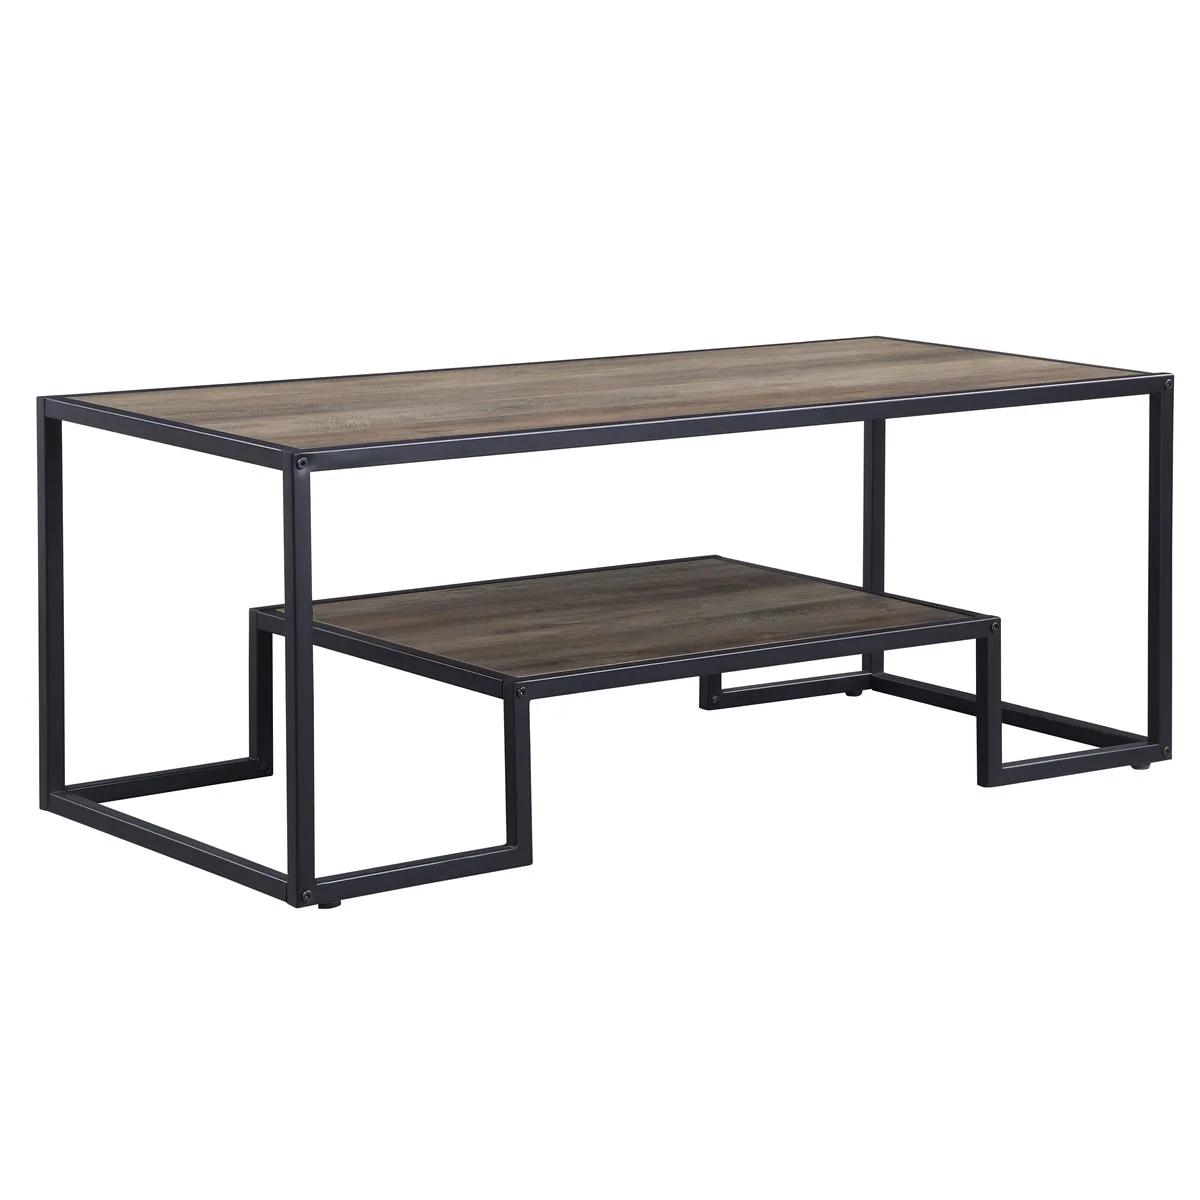 

    
Contemporary Rustic Oak Coffee Table + End Table + Console Table by Acme Idella LV00324-3pcs
